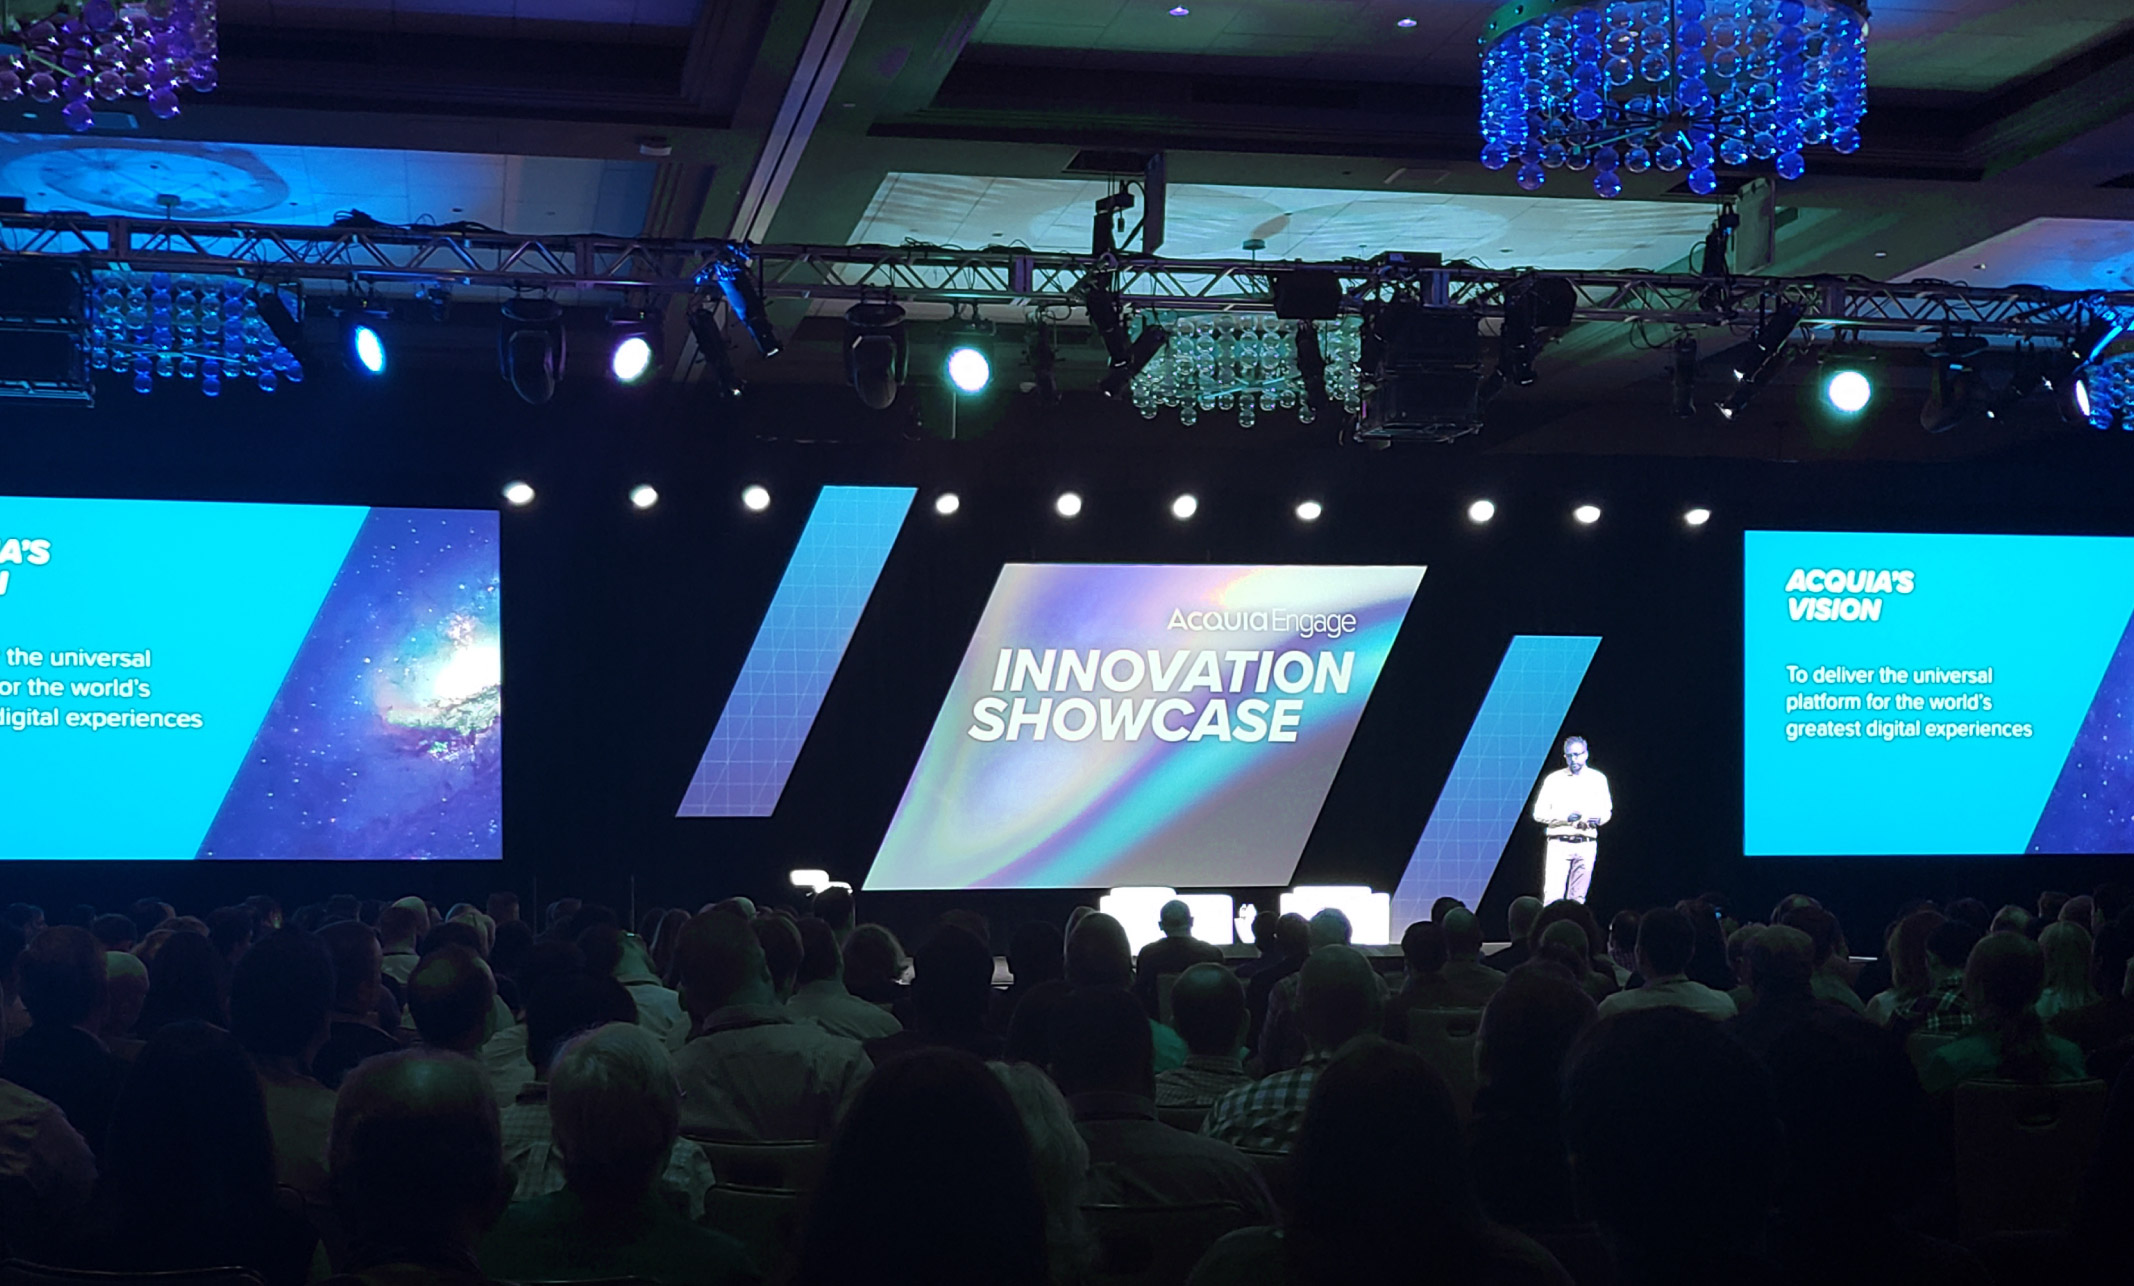 The stage during Acquia Engage Innovation Showcase with a keynote speaker in front of the crowd